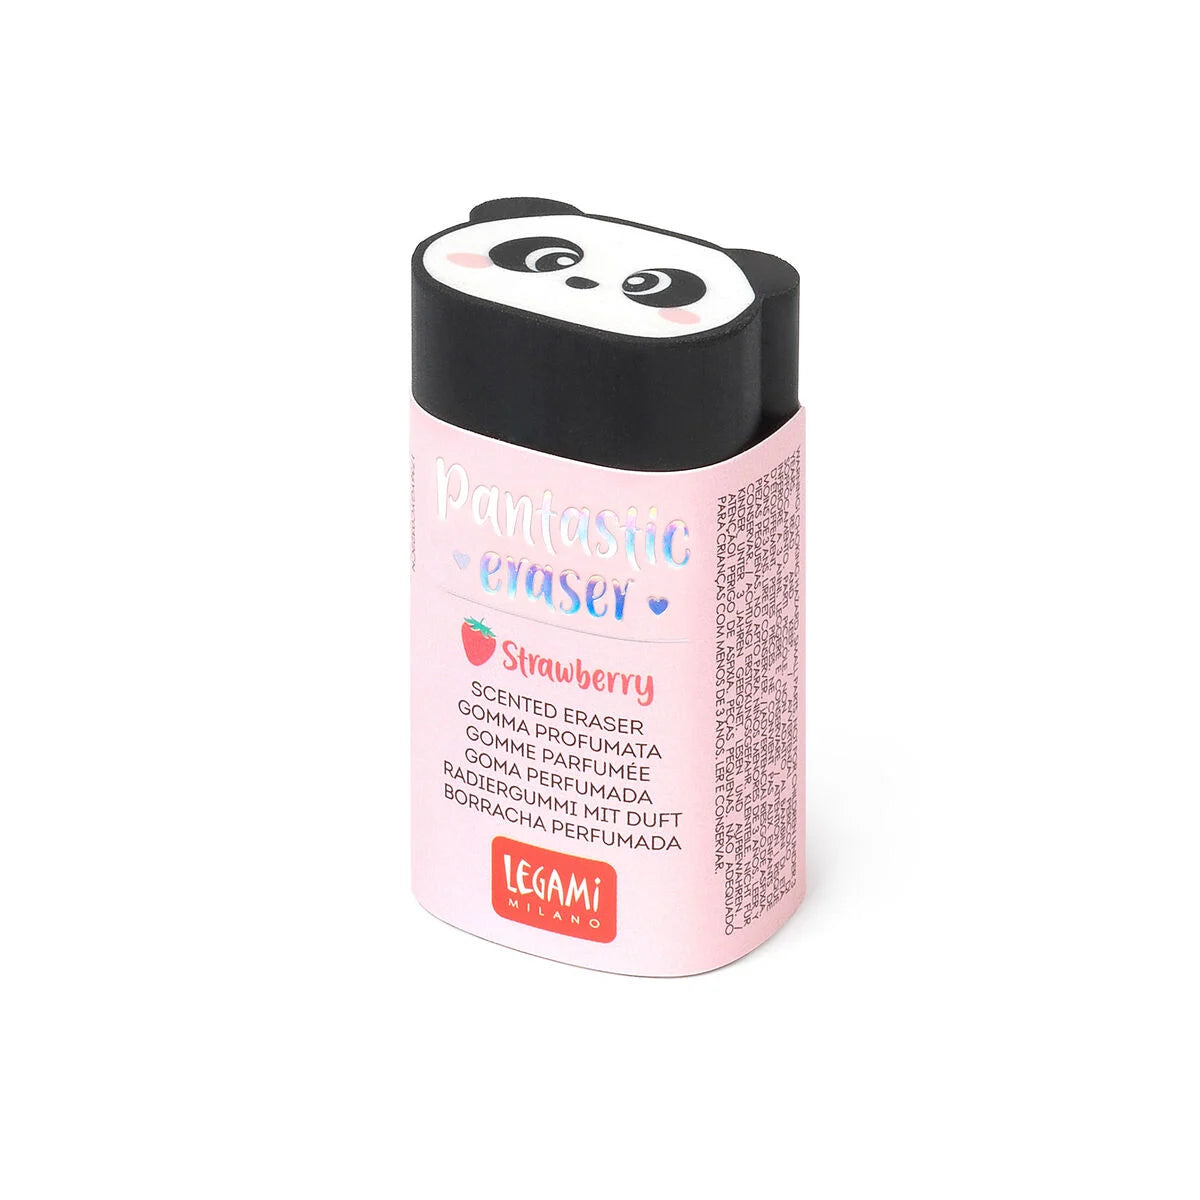 Back to School | Legami Scented Eraser Panda by Weirs of Baggot Street